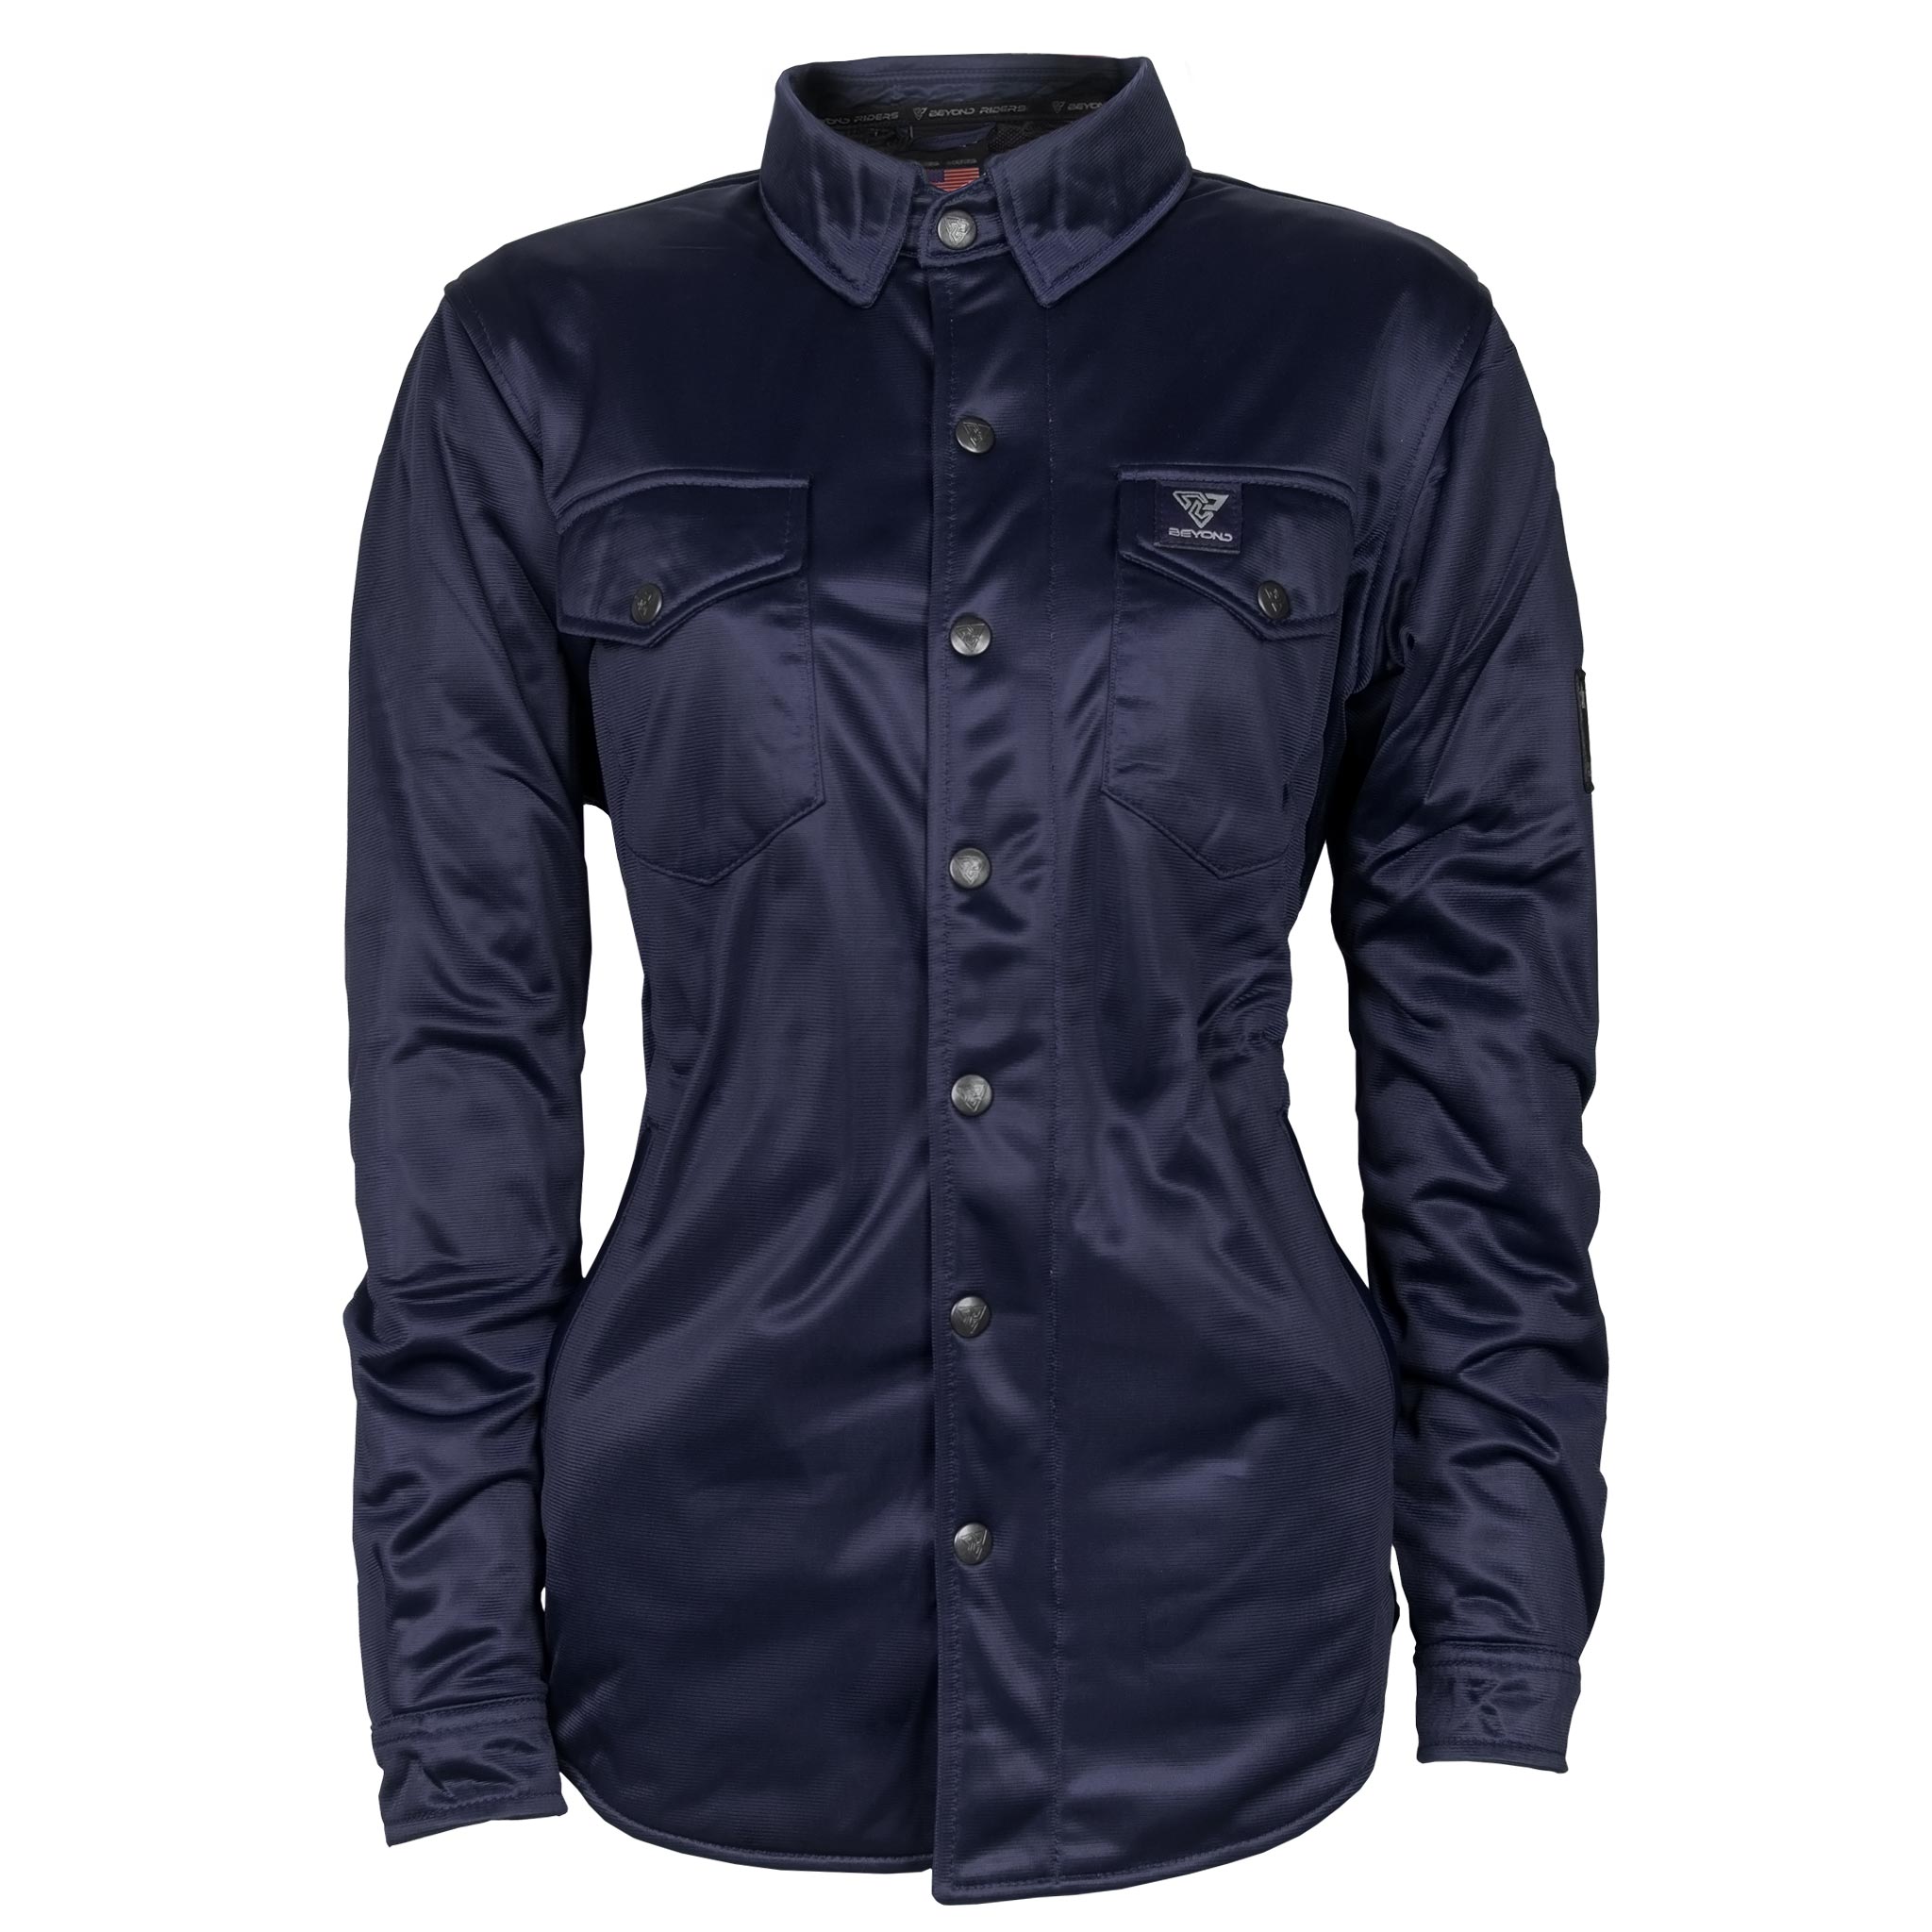 Ultra Protective Shirt for Women - Dark Navy Blue Solid with Pads